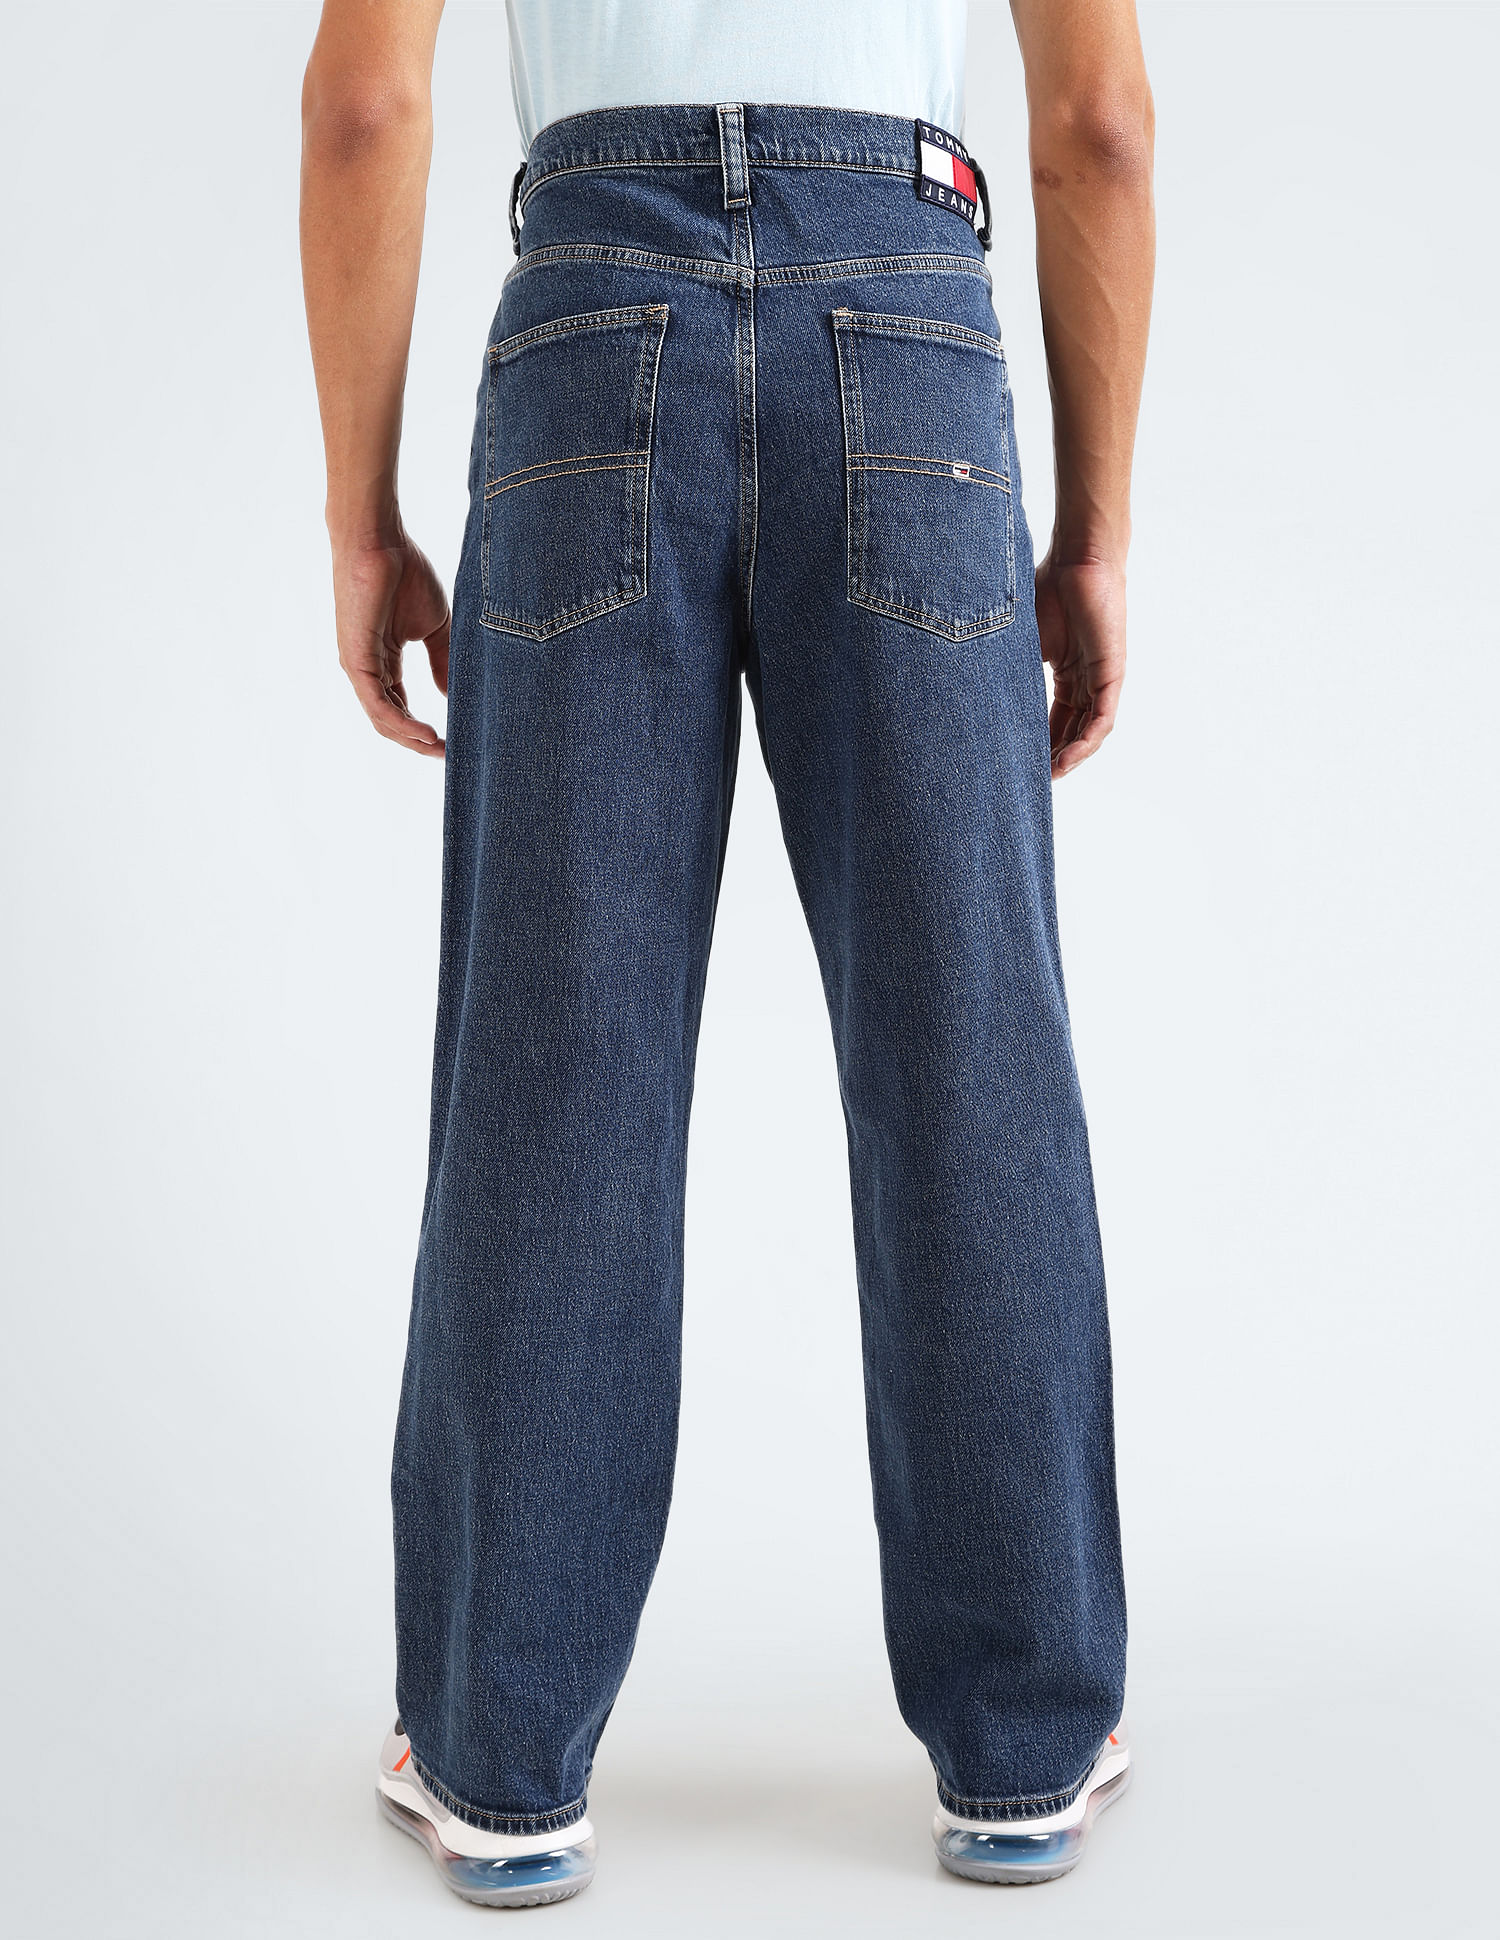 Buy Hilfiger Cotton Rinsed Aiden Baggy Jeans - NNNOW.com